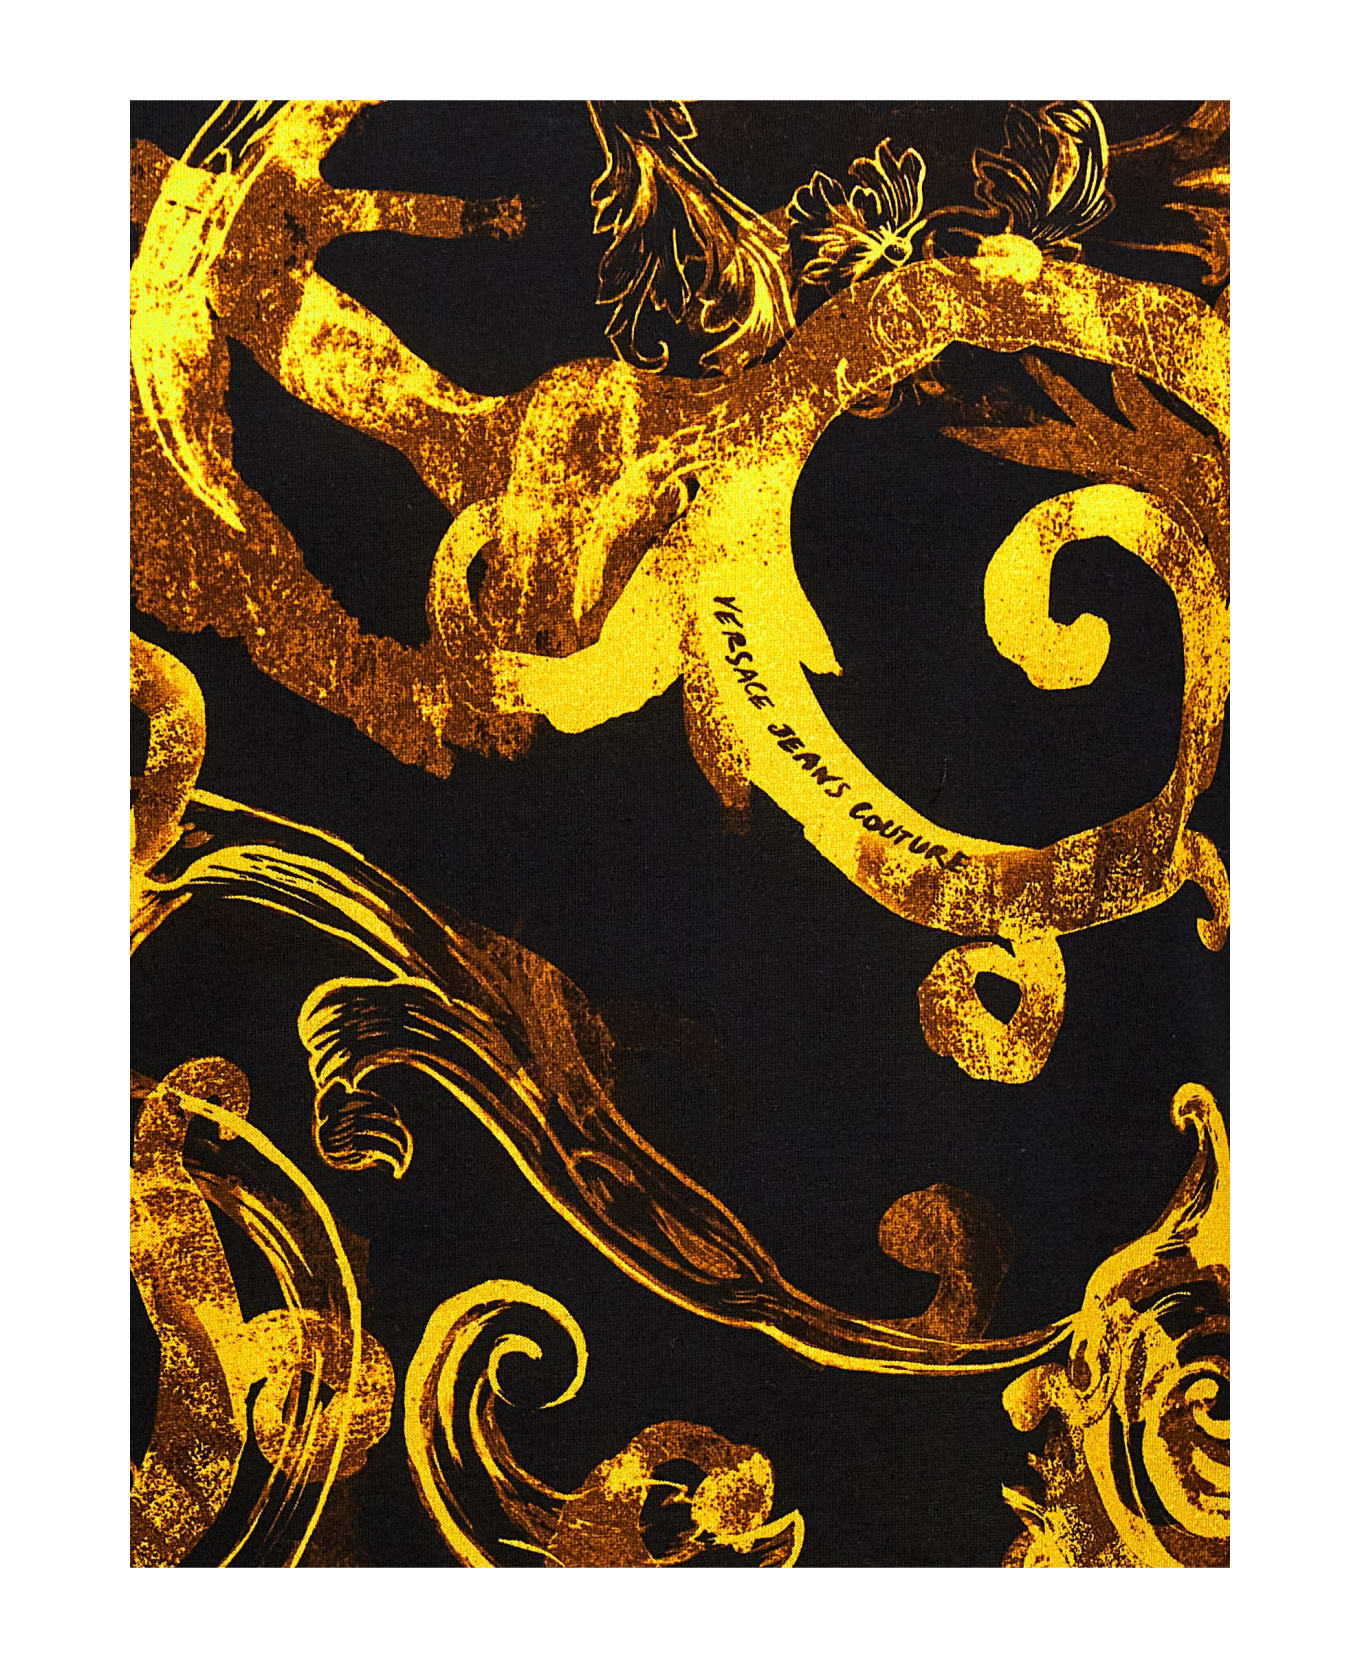 Versace Jeans Couture All Over Print T-shirt - BLACK/GOLD シャツ